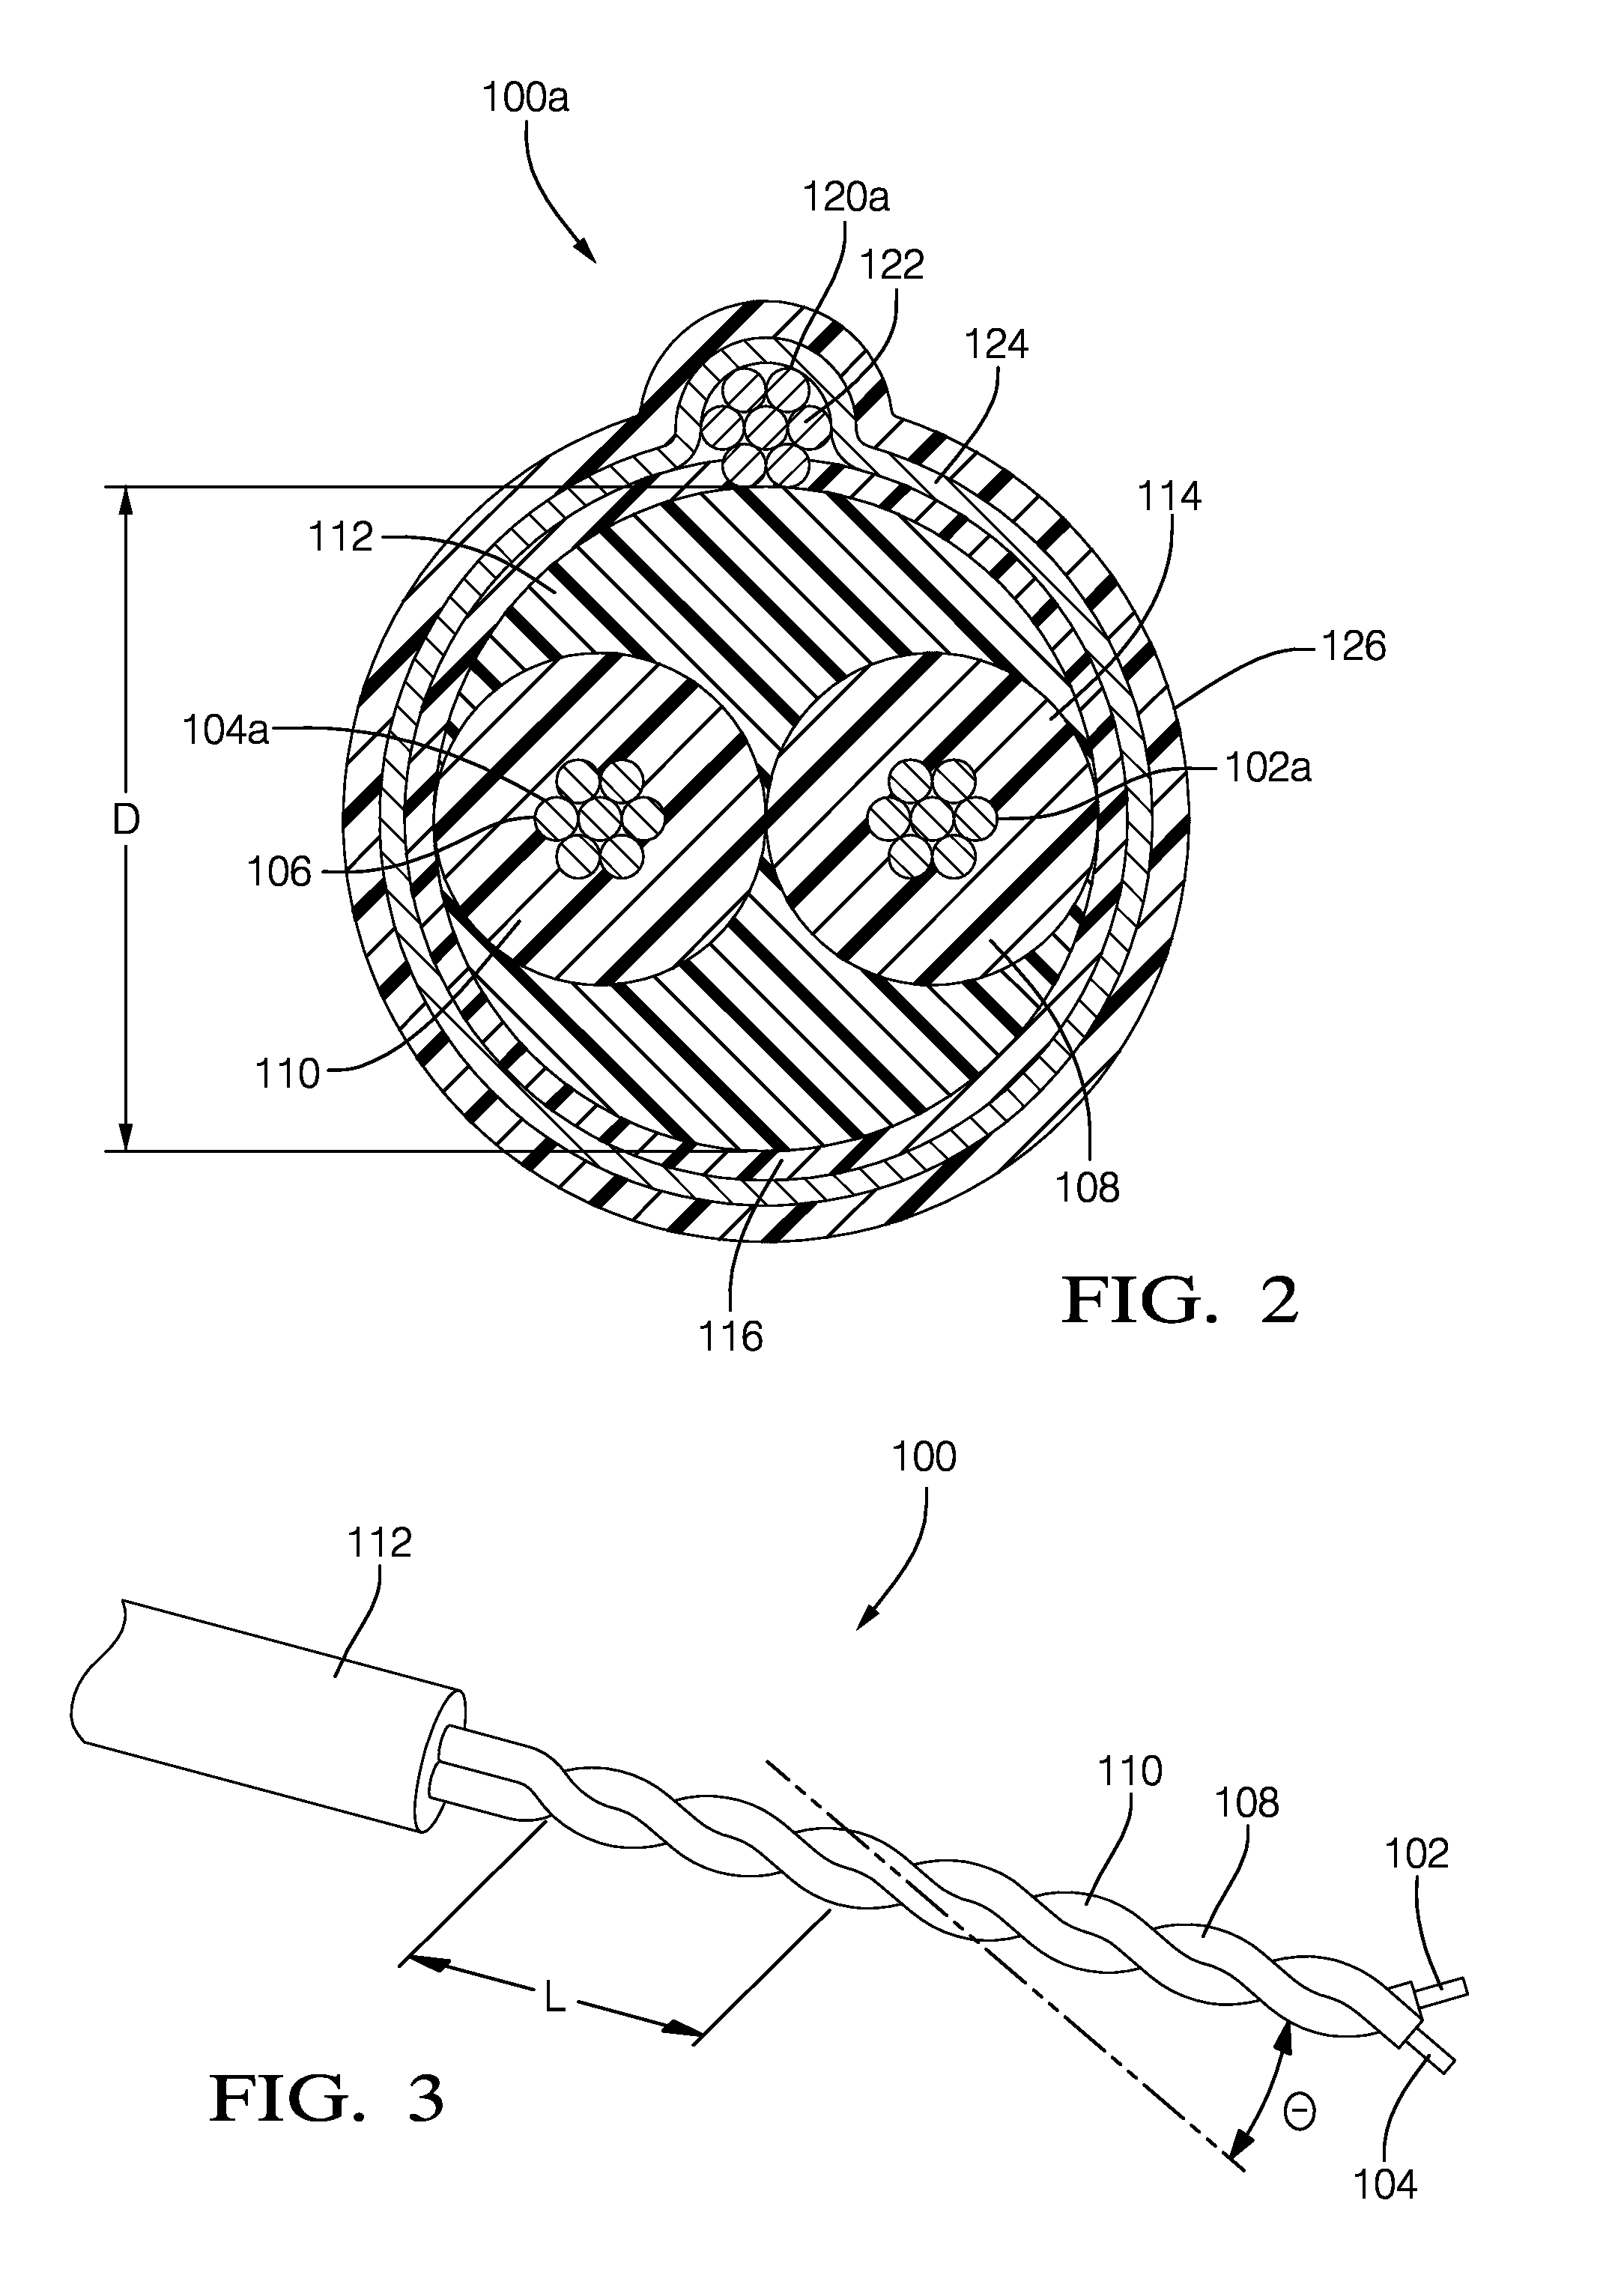 Electrical connection system